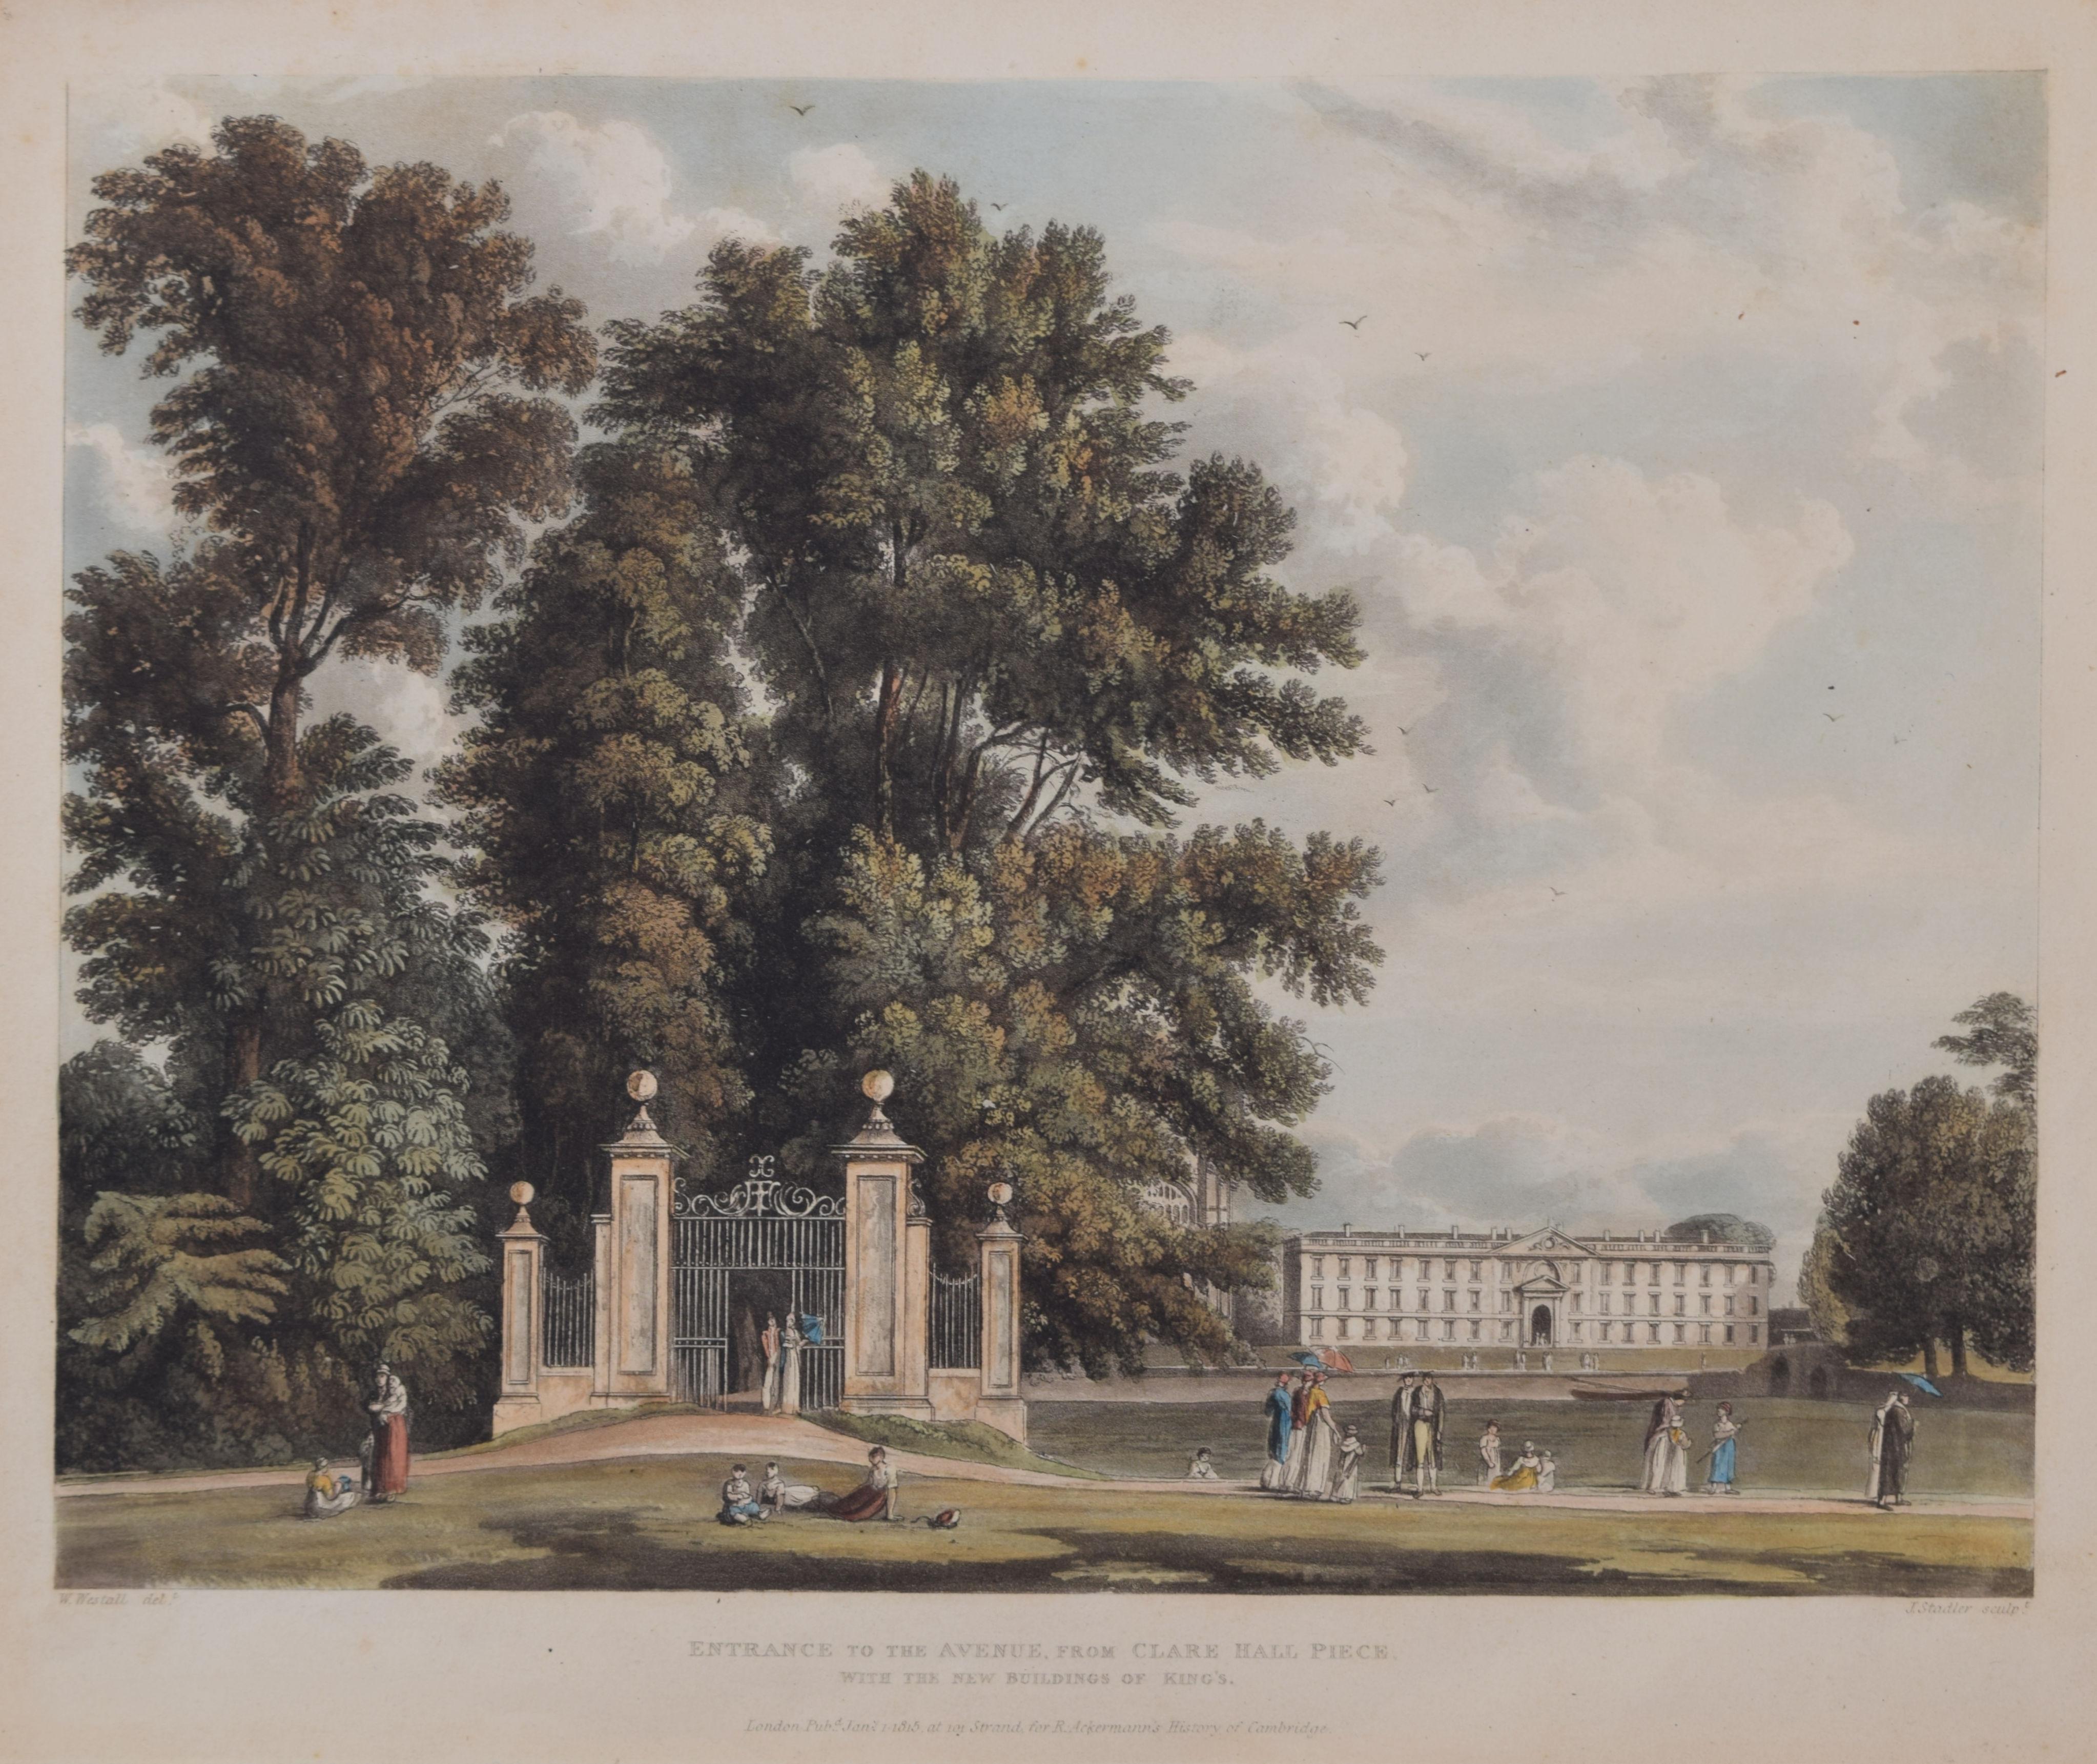 Clare College, Cambridge / Clare Hall / King's College engraving by Stadler - Print by Joseph Constantine Stadler